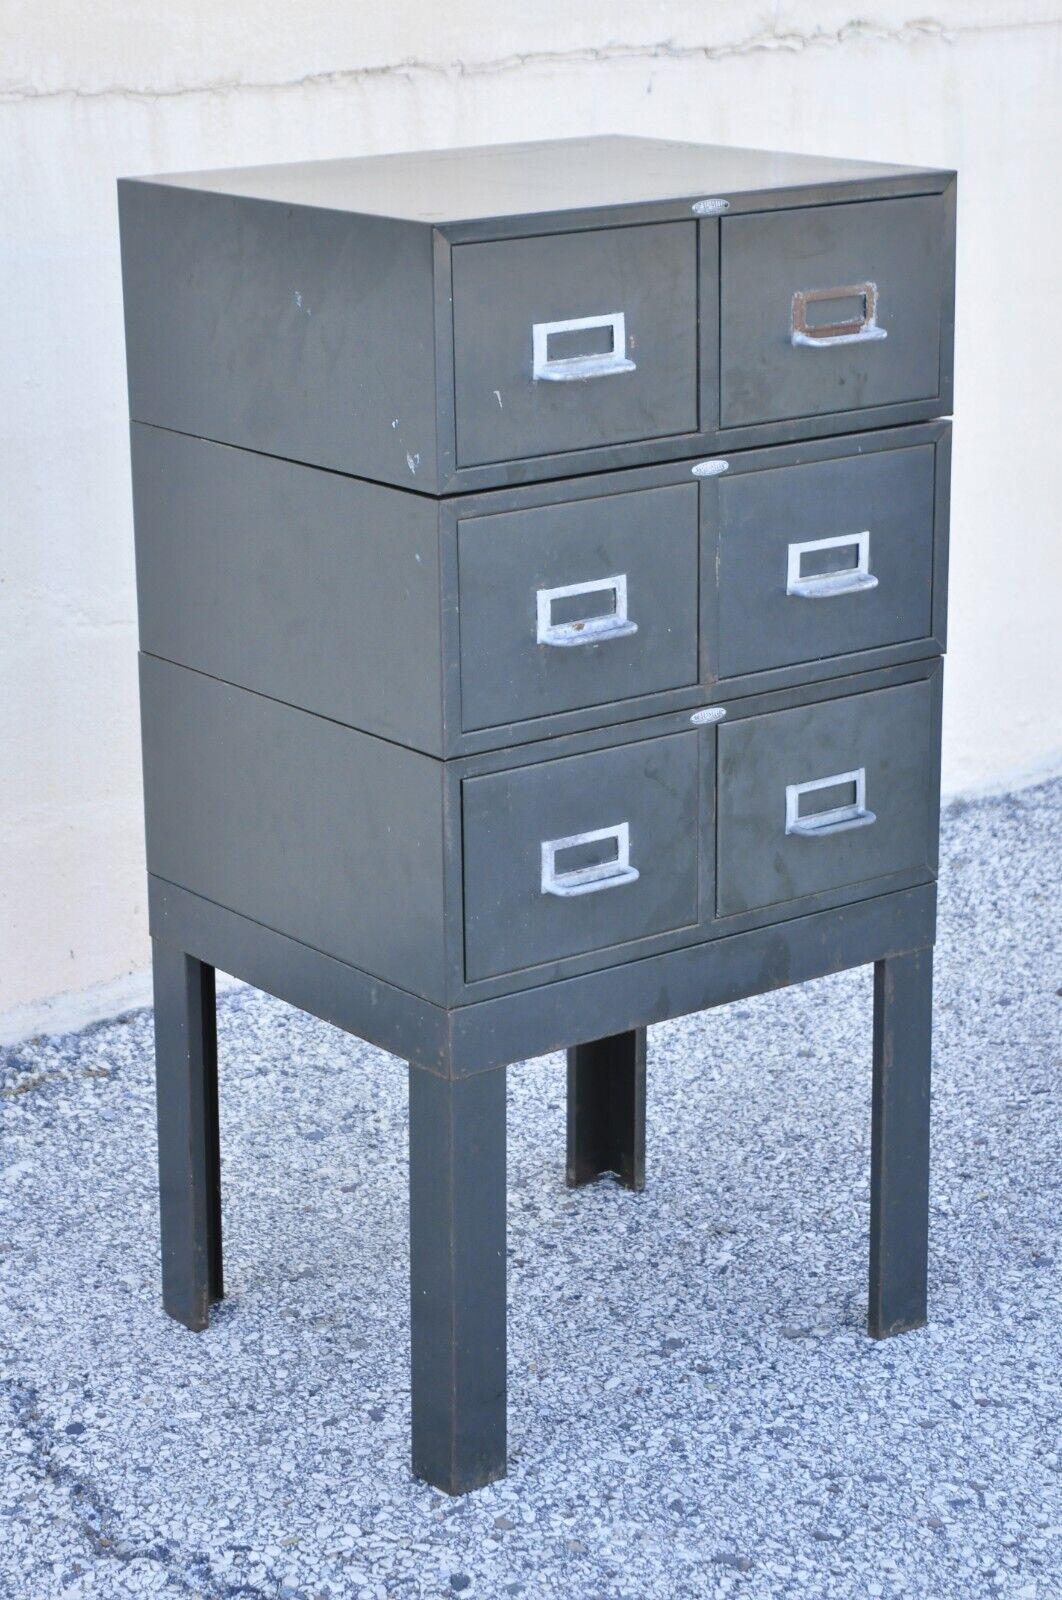 Vintage Cole Steel industrial steel metal gray stacking work file card cabinet. Item features a metal frame, 6 drawers, 4 part construction, quality American craftsmanship, great style and form. Circa mid 20th century. Measurements: 36.5